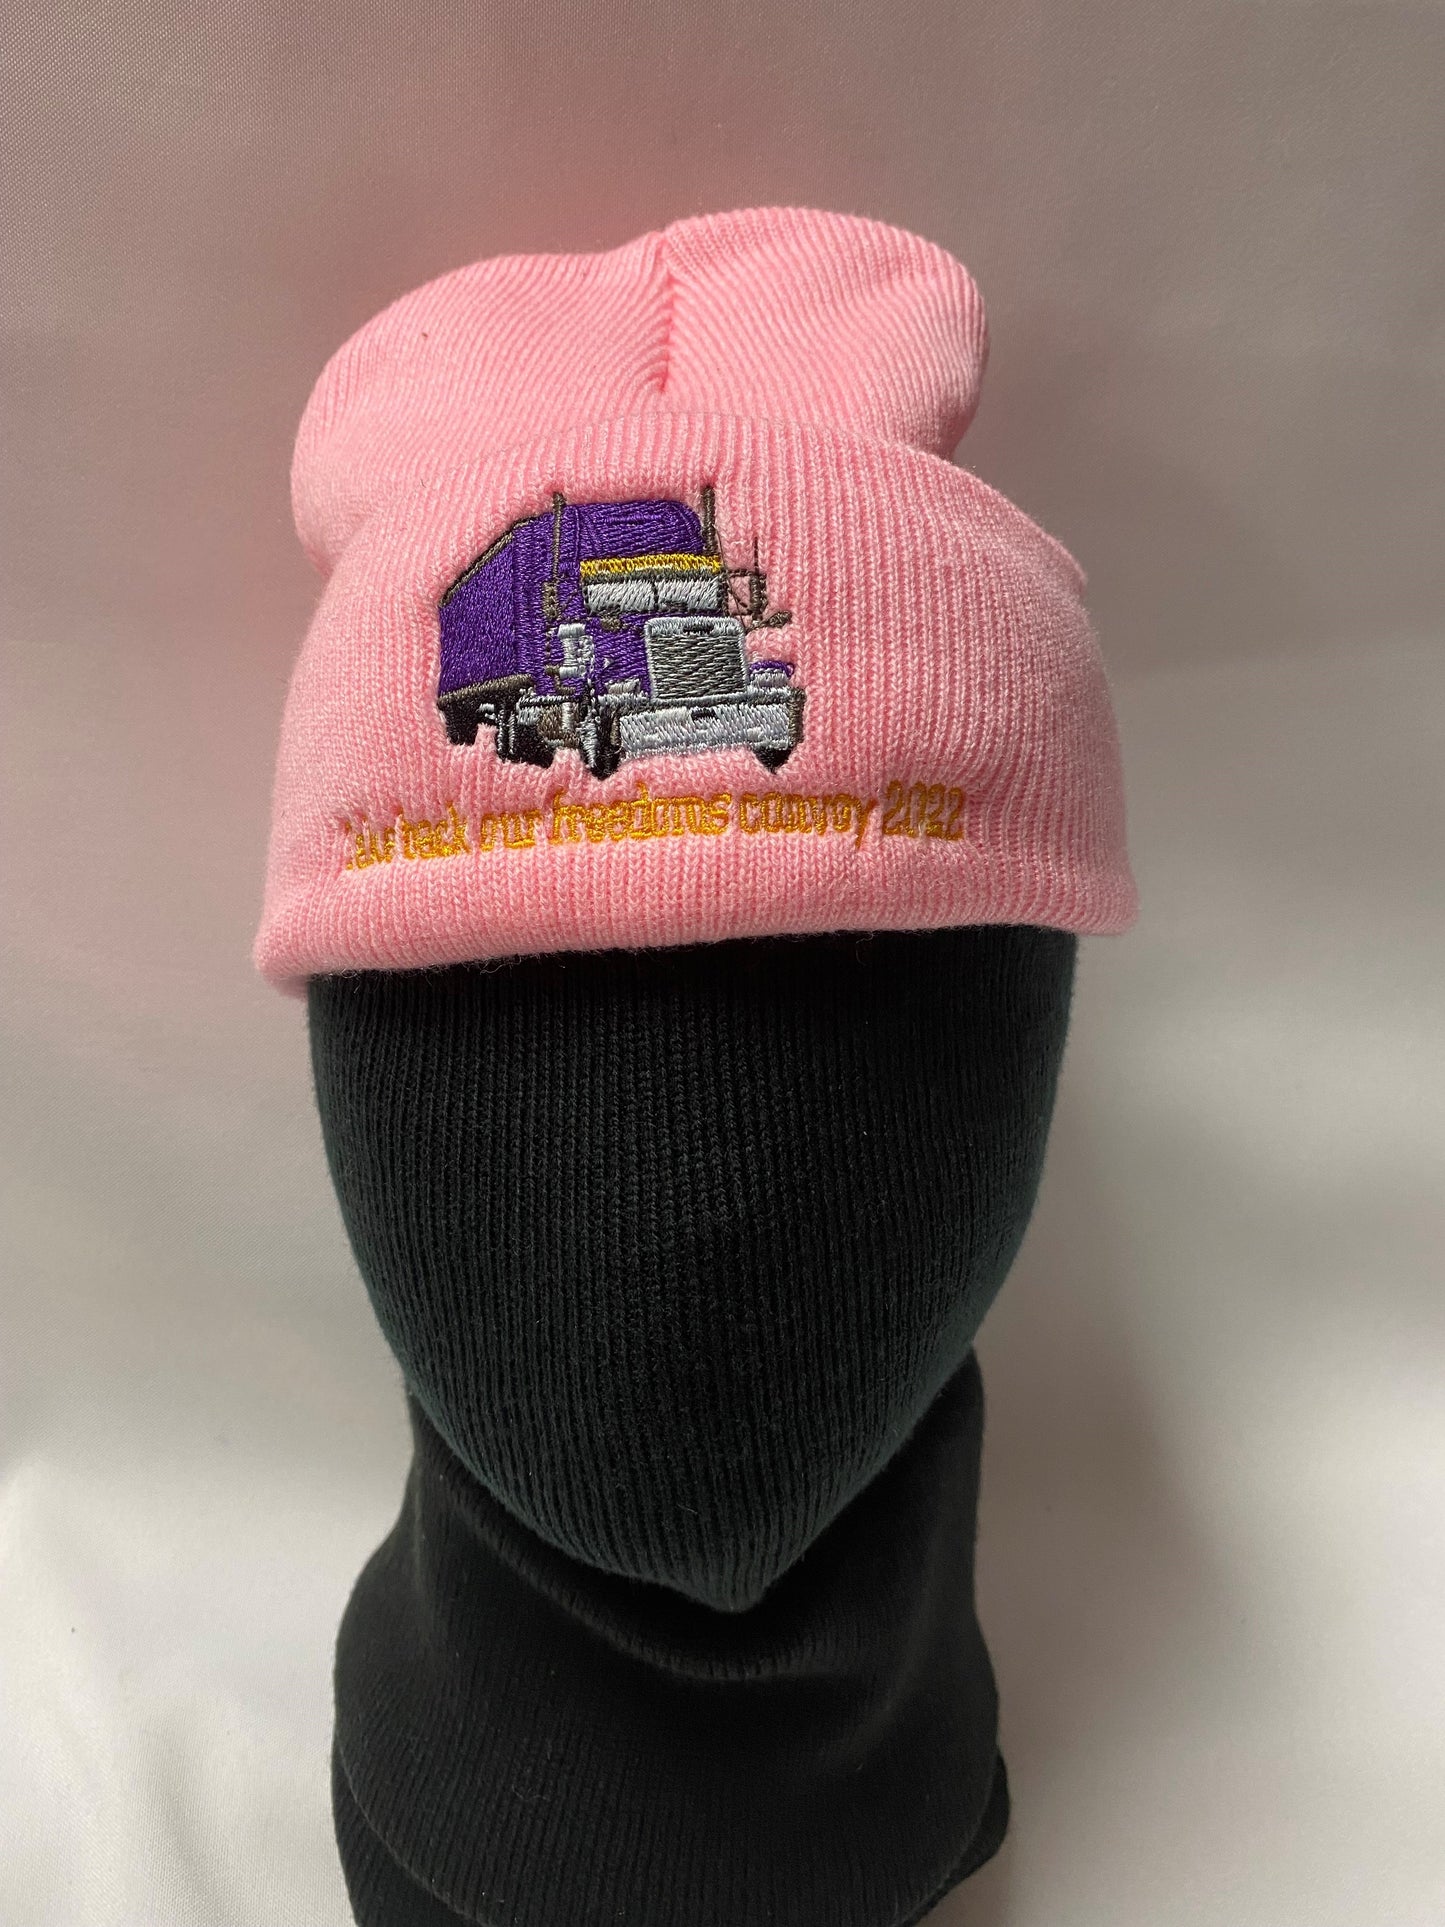 TRUCKER TOQUE Multiple colors: "Take back our freedoms convoy 2022"